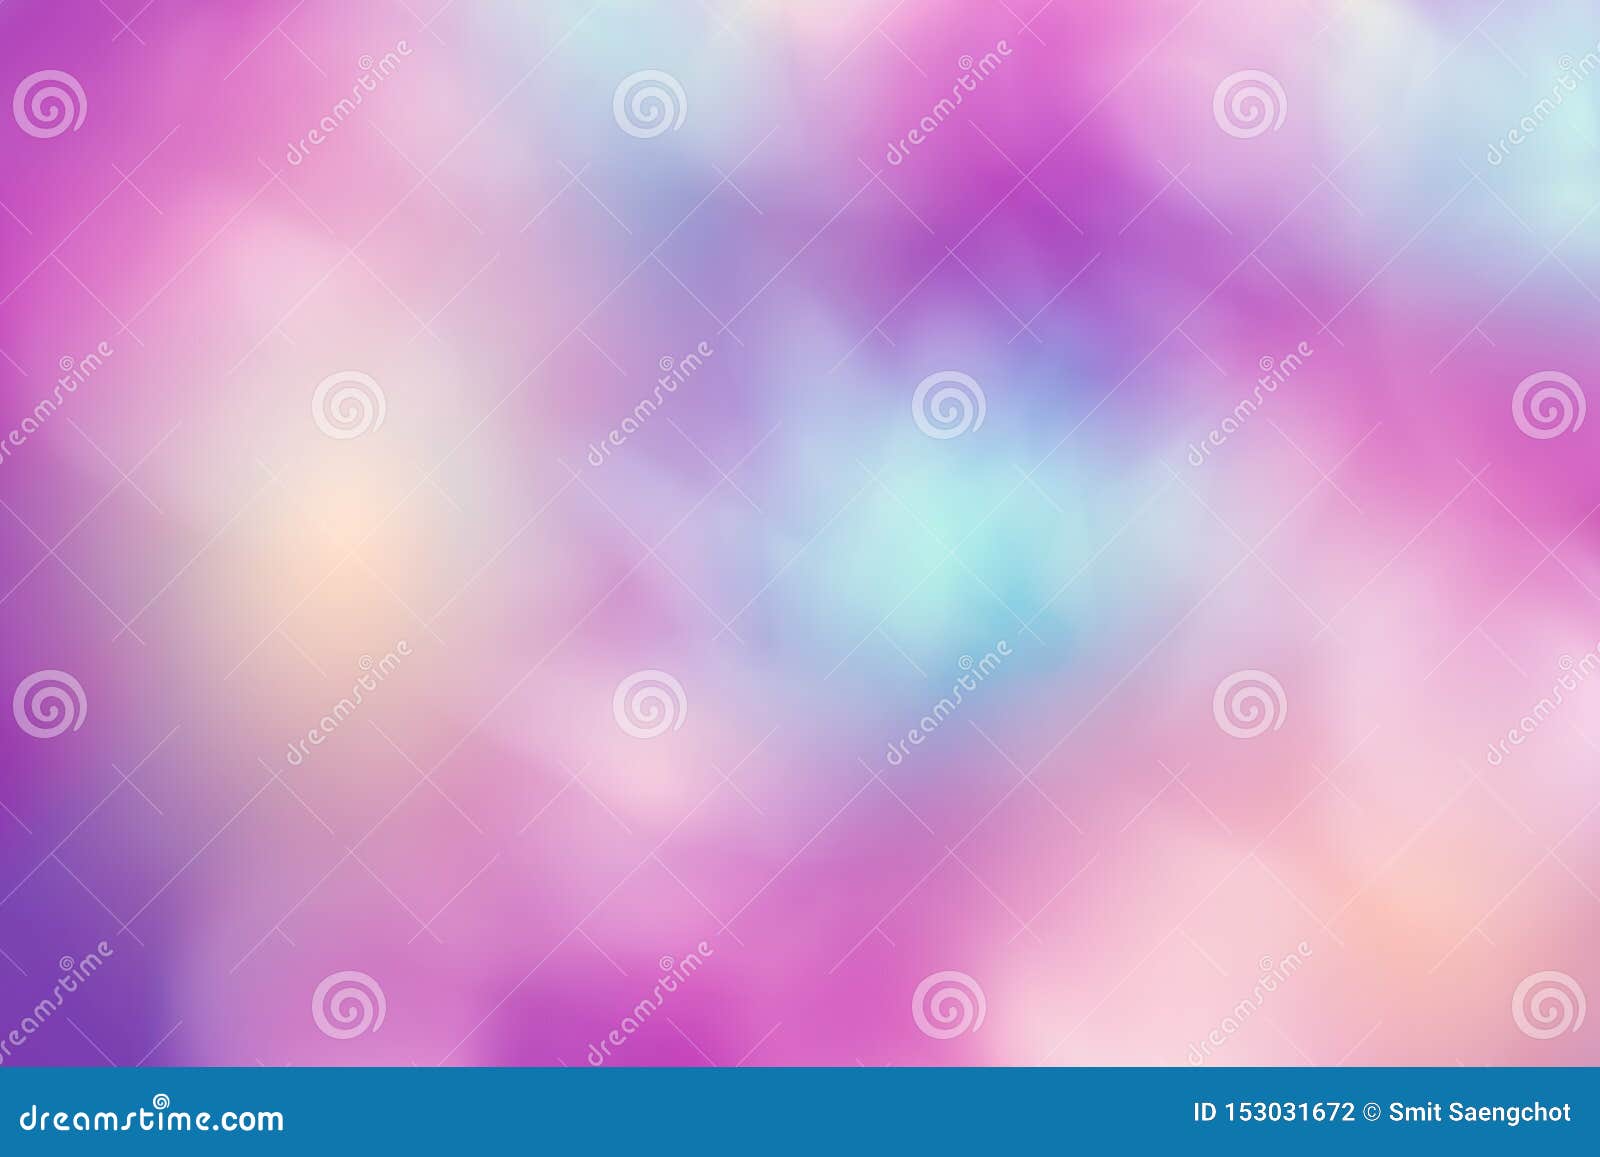 colorful blurred backgrounds, abstract multicolor blur background, purple background